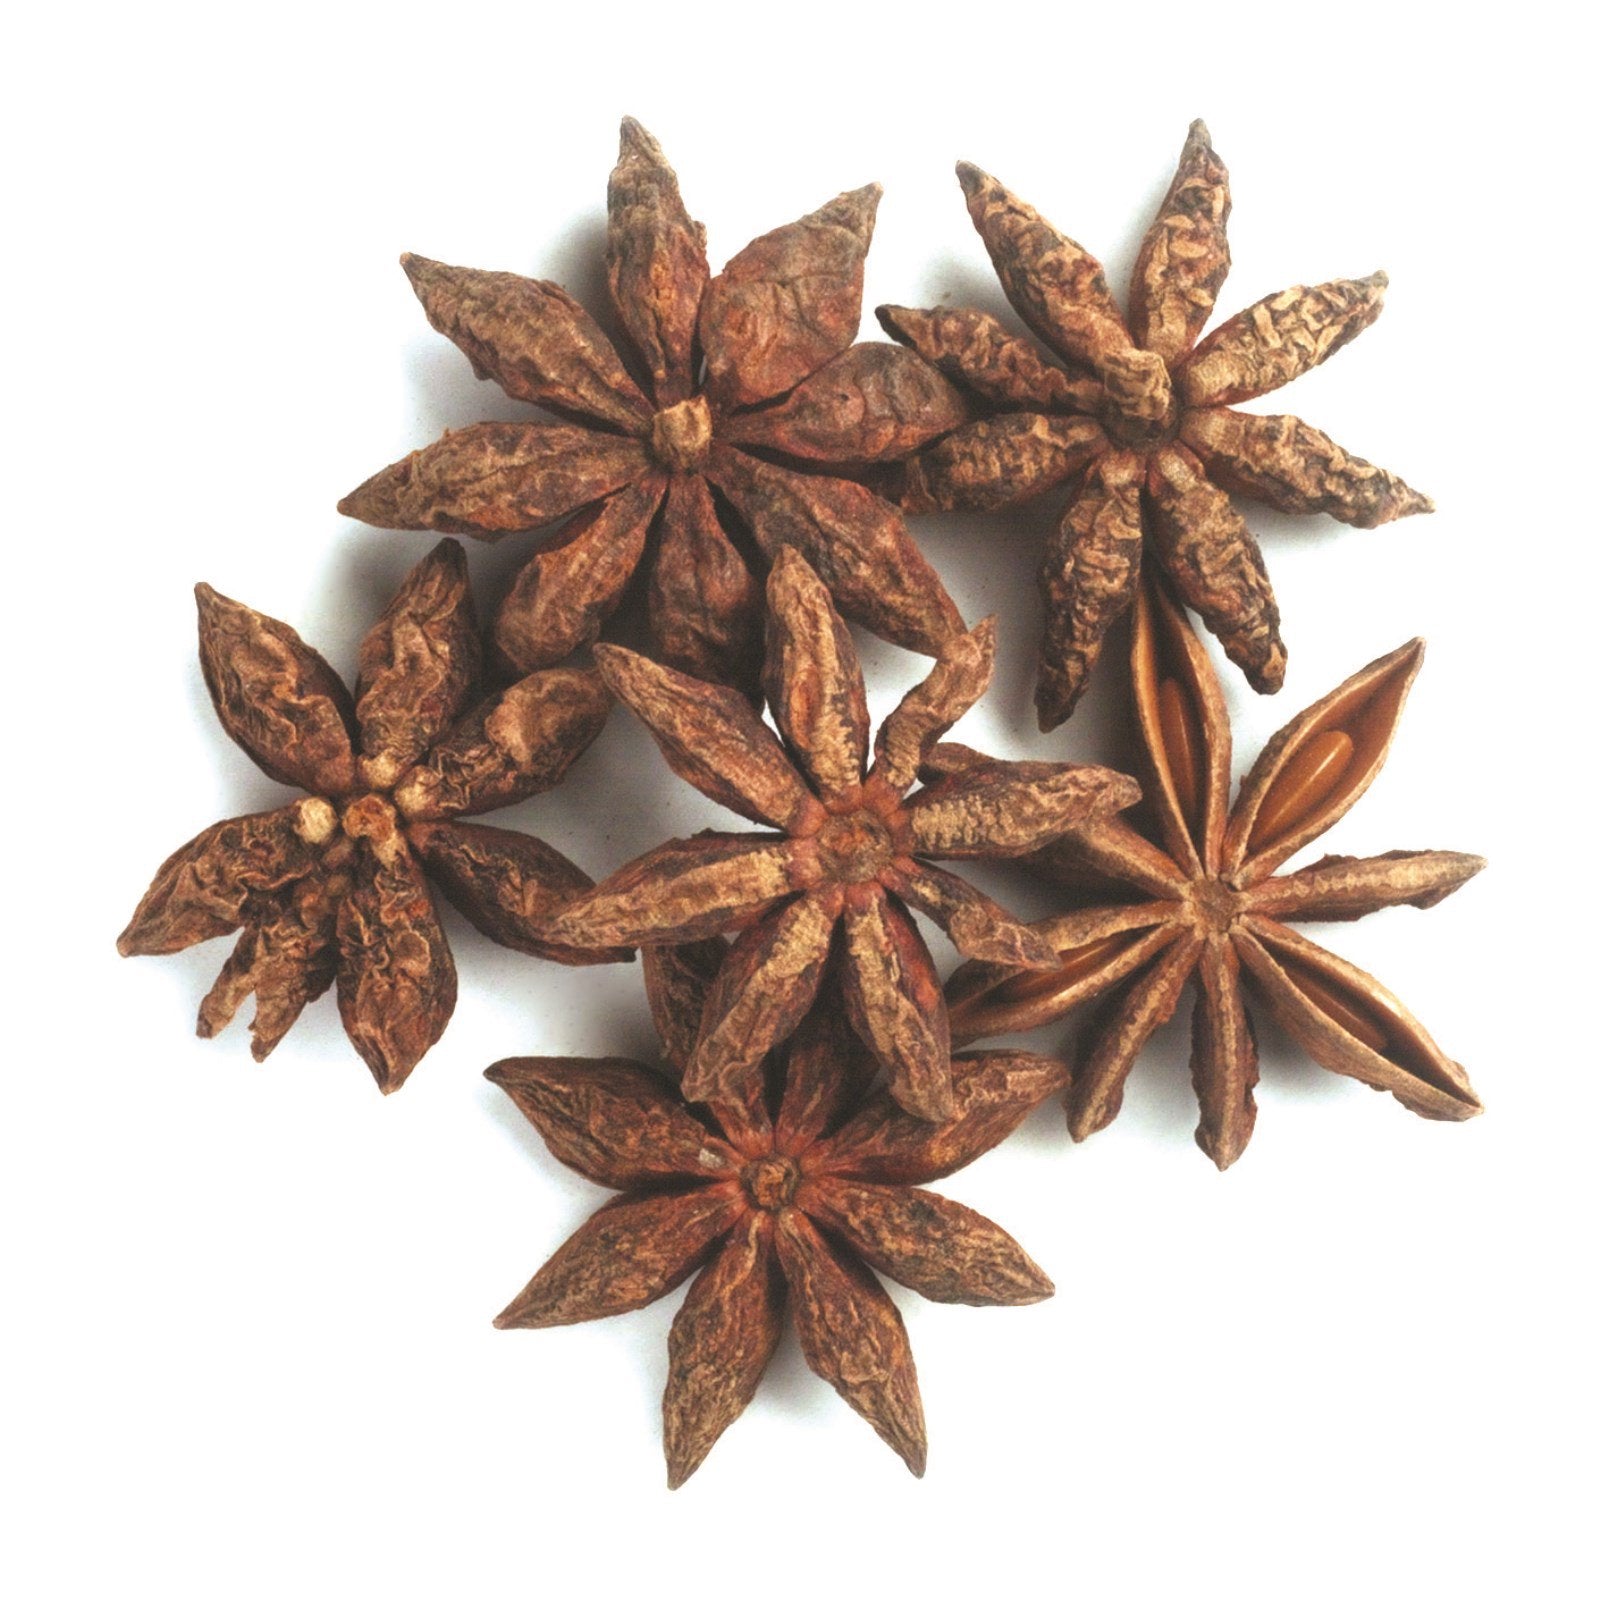 Frontier Natural Products, Organic Whole Star Anise Select, 16 oz (453 g)